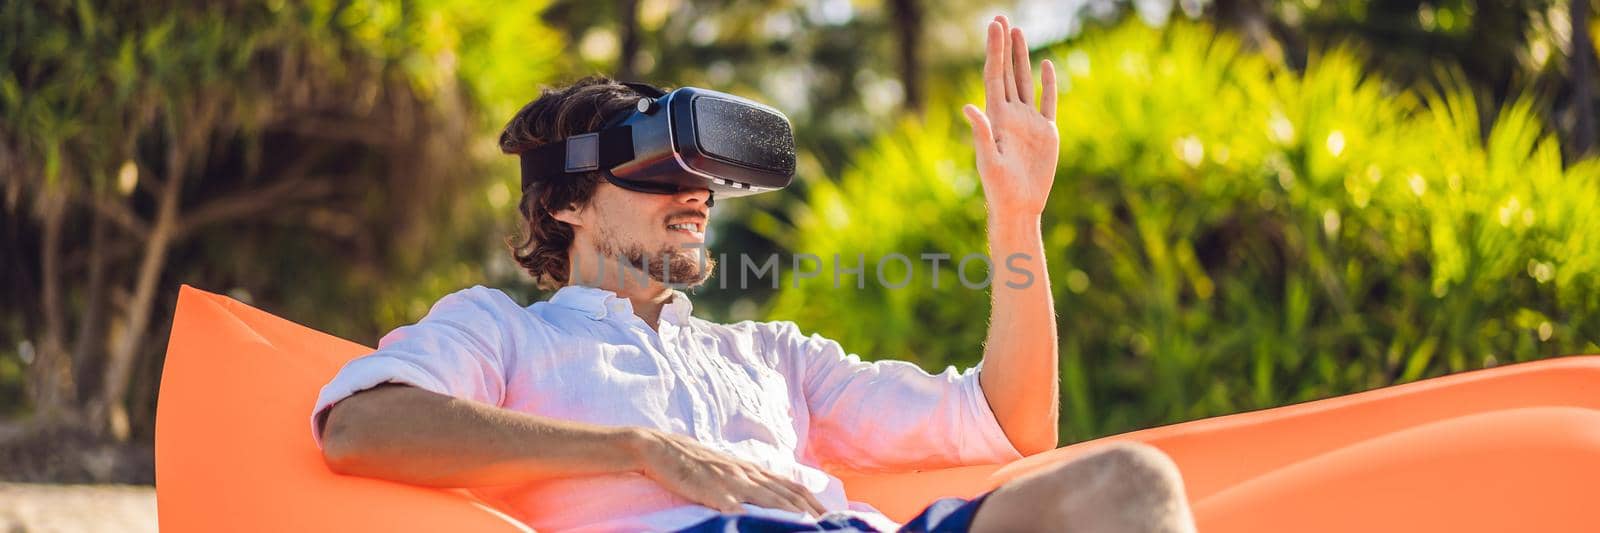 BANNER, LONG FORMAT Summer lifestyle portrait of man sitting on the orange inflatable sofa and uses virtual reality headset on the beach of tropical island. Relaxing and enjoying life on air bed.